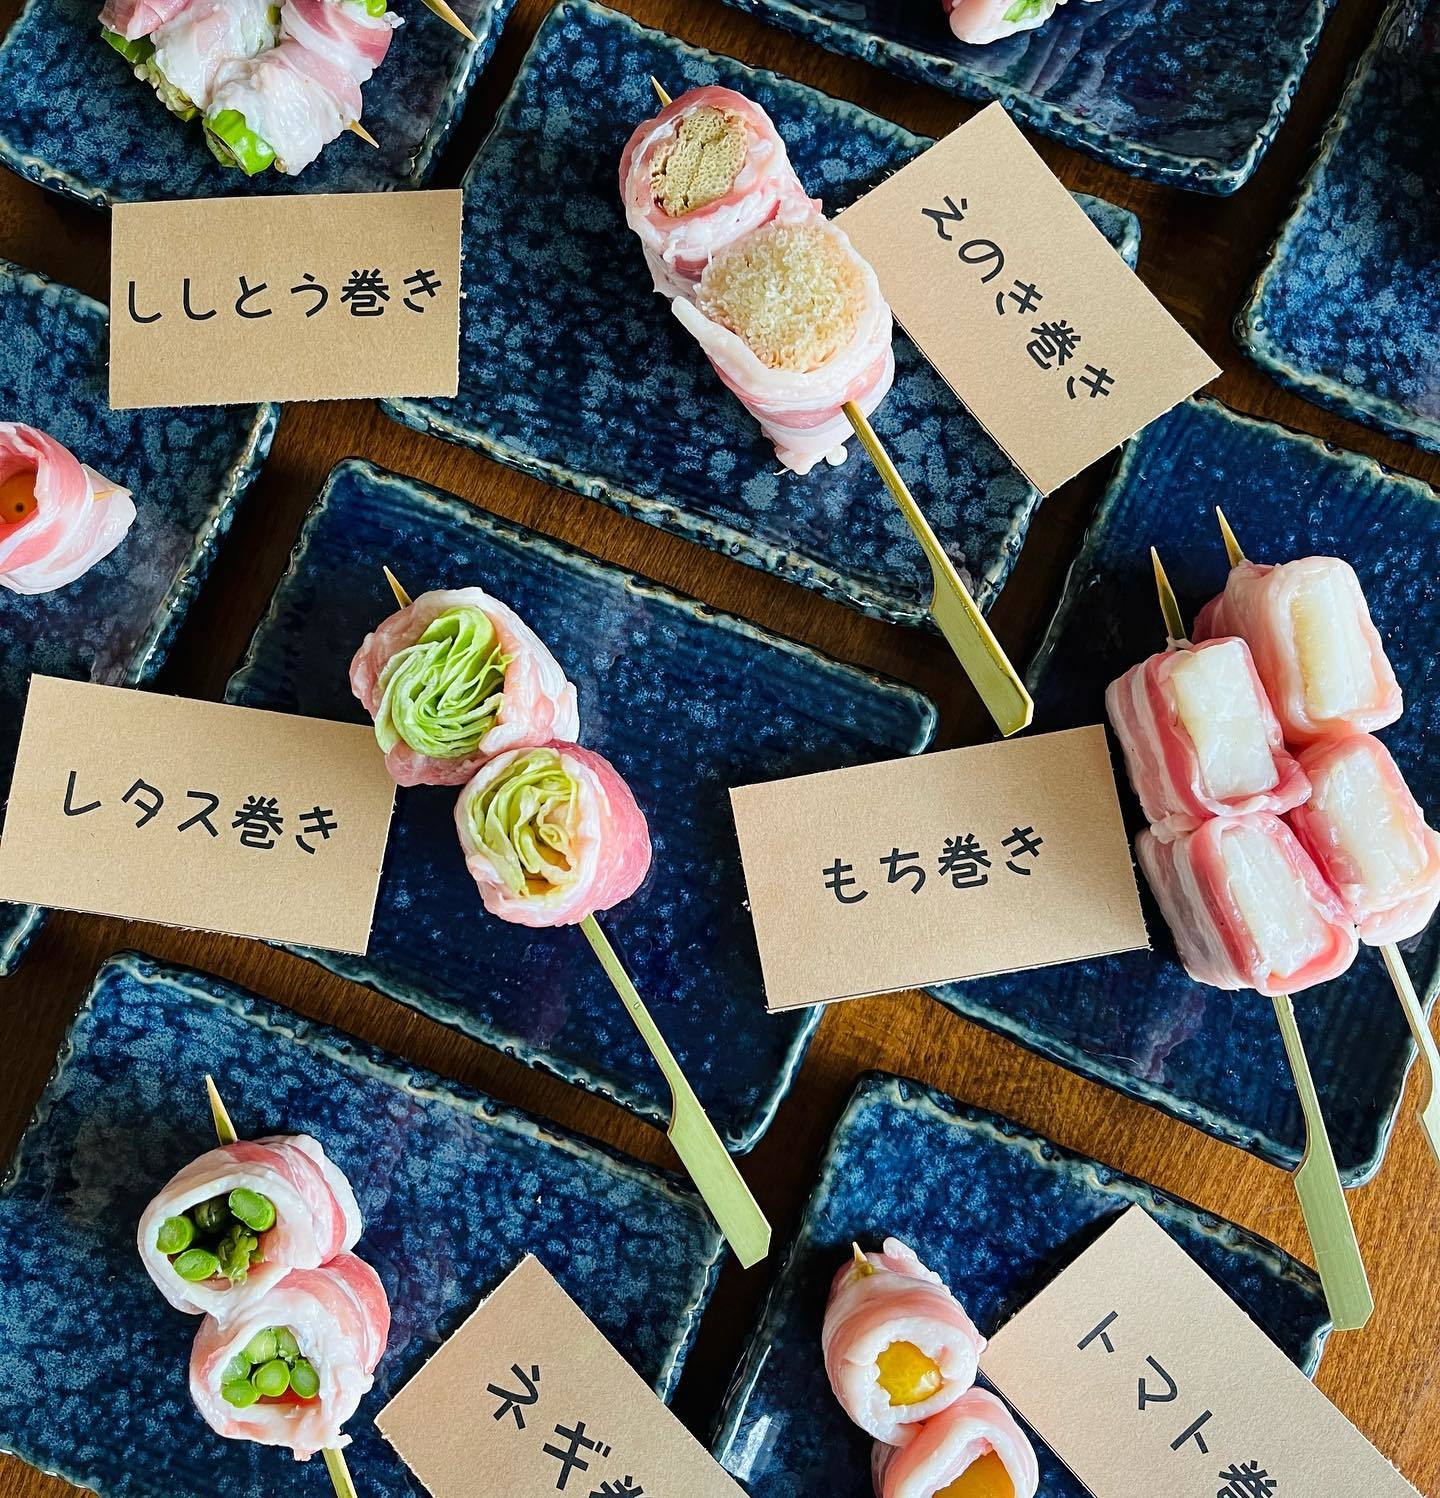 japanese skewered dishes on blue plates